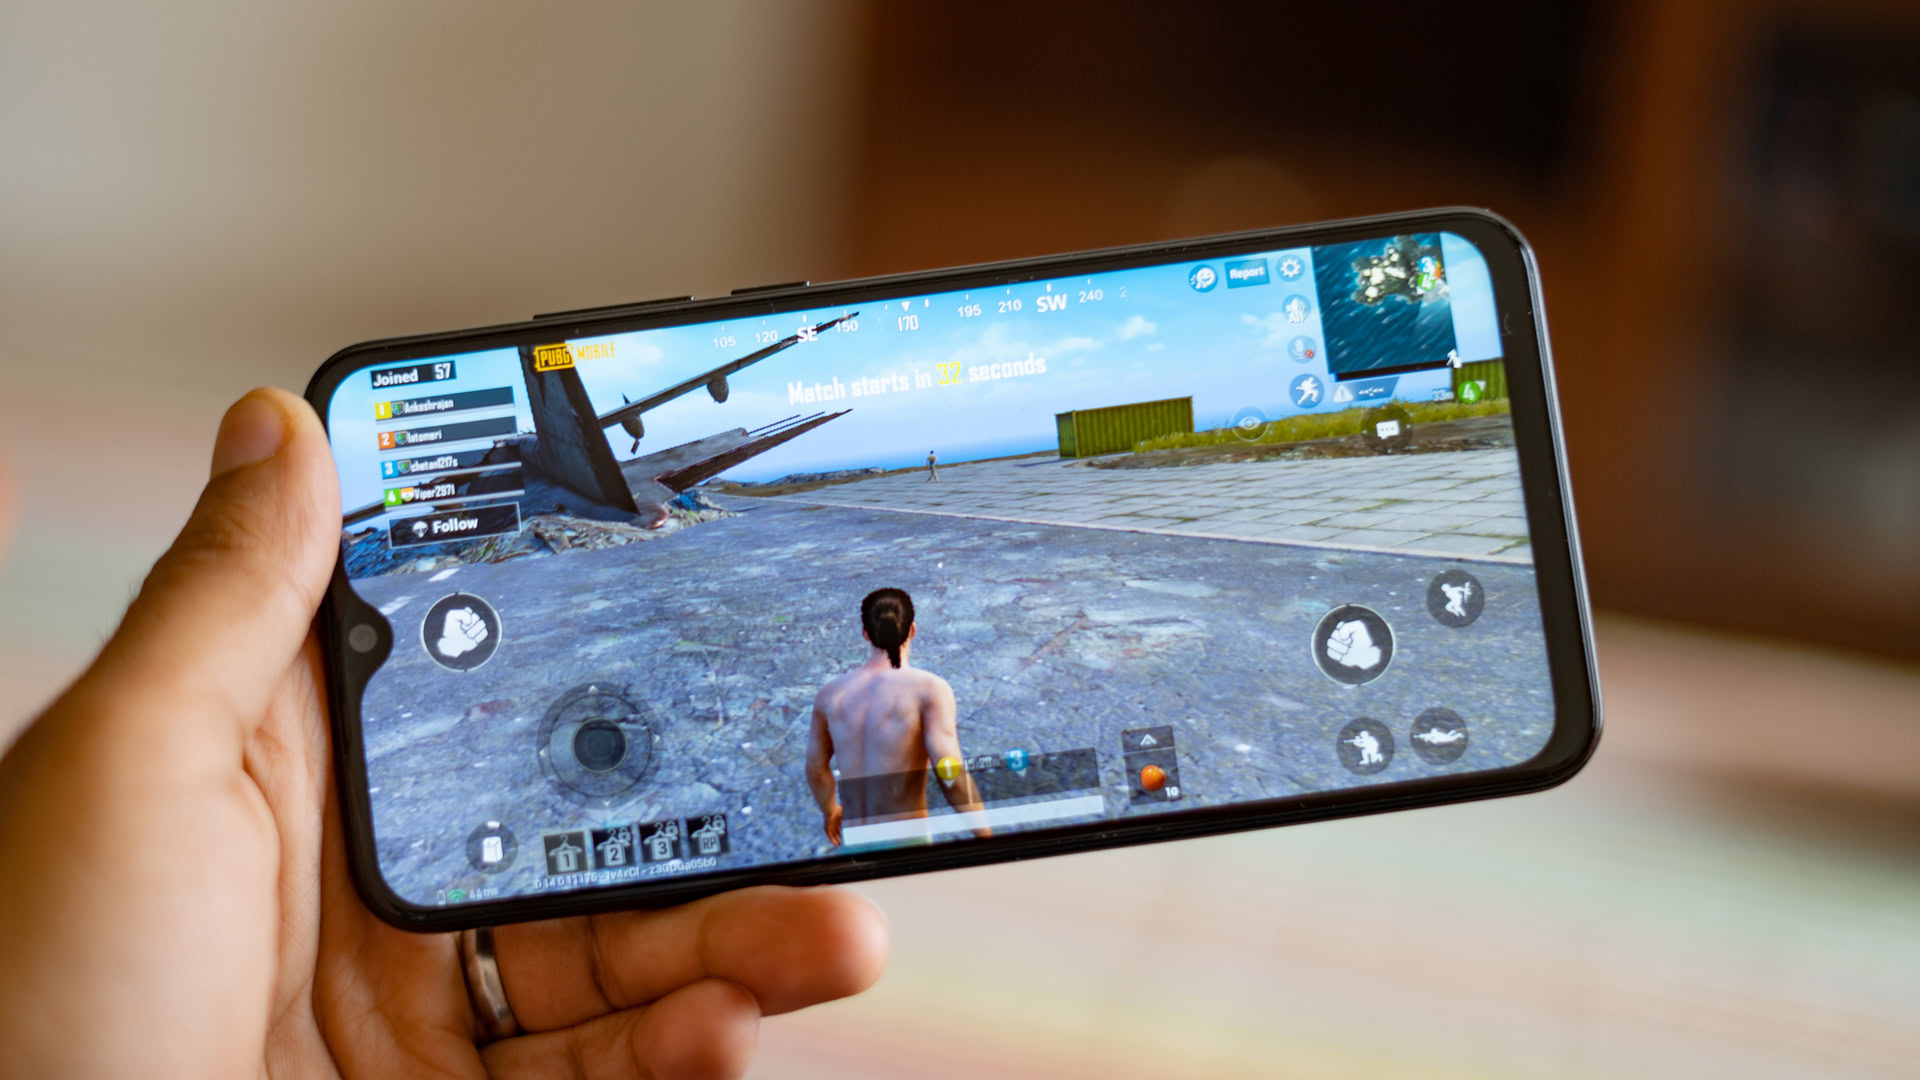 Garena Free Fire Still Available On Galaxy Smartphones Even After Getting  Banned By Indian Government